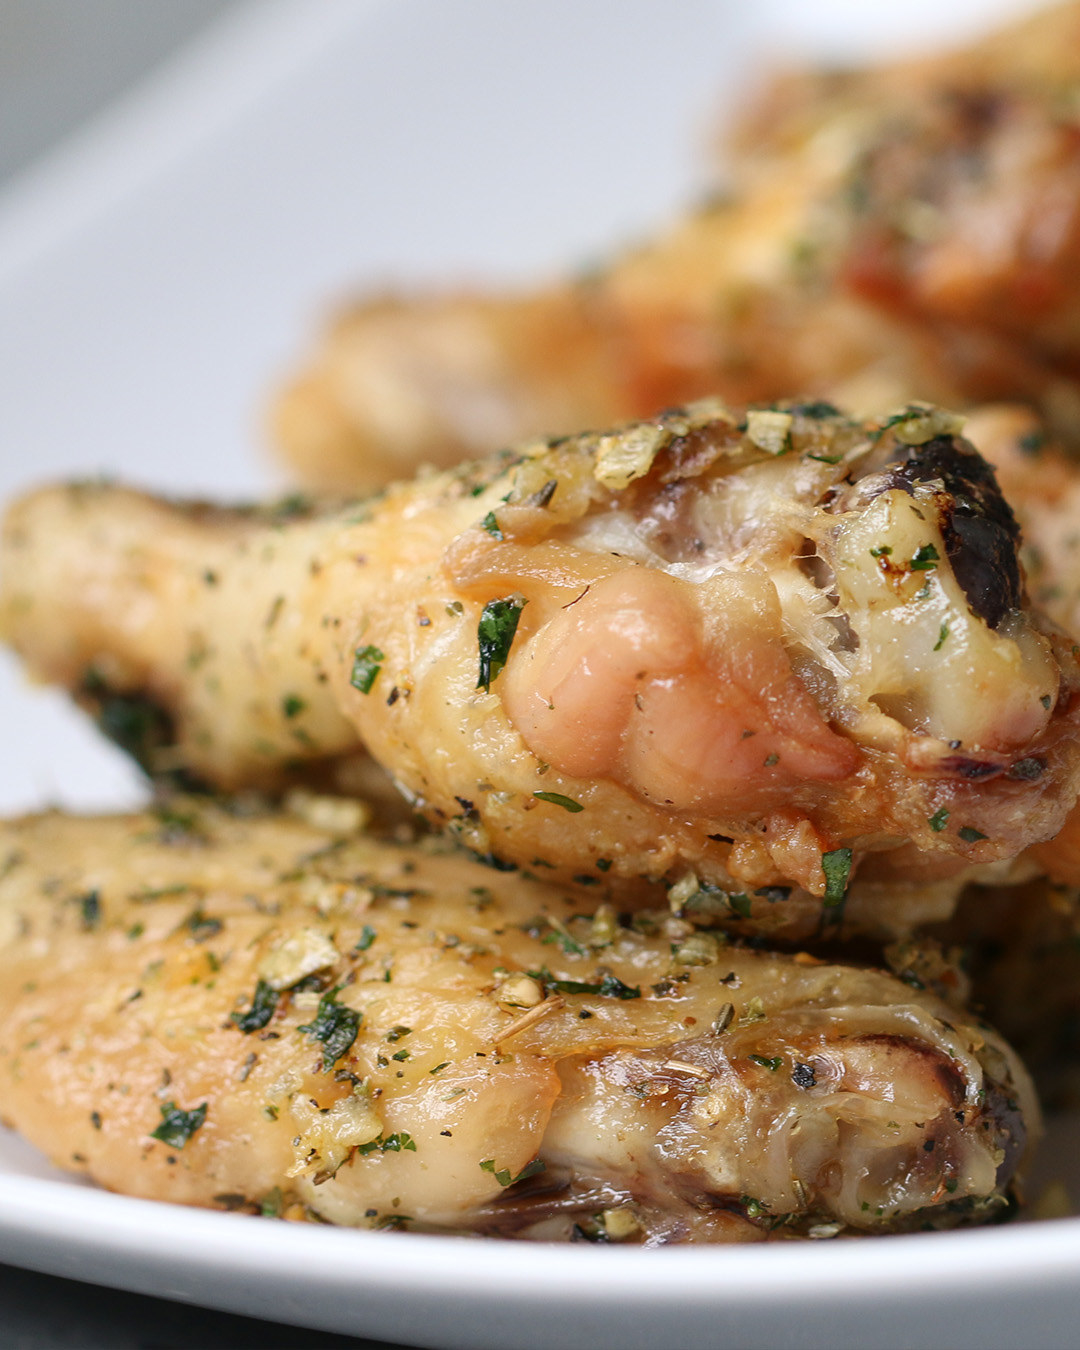 Bring The Takeout Home With These Four Easy Ways To Make Baked Chicken ...